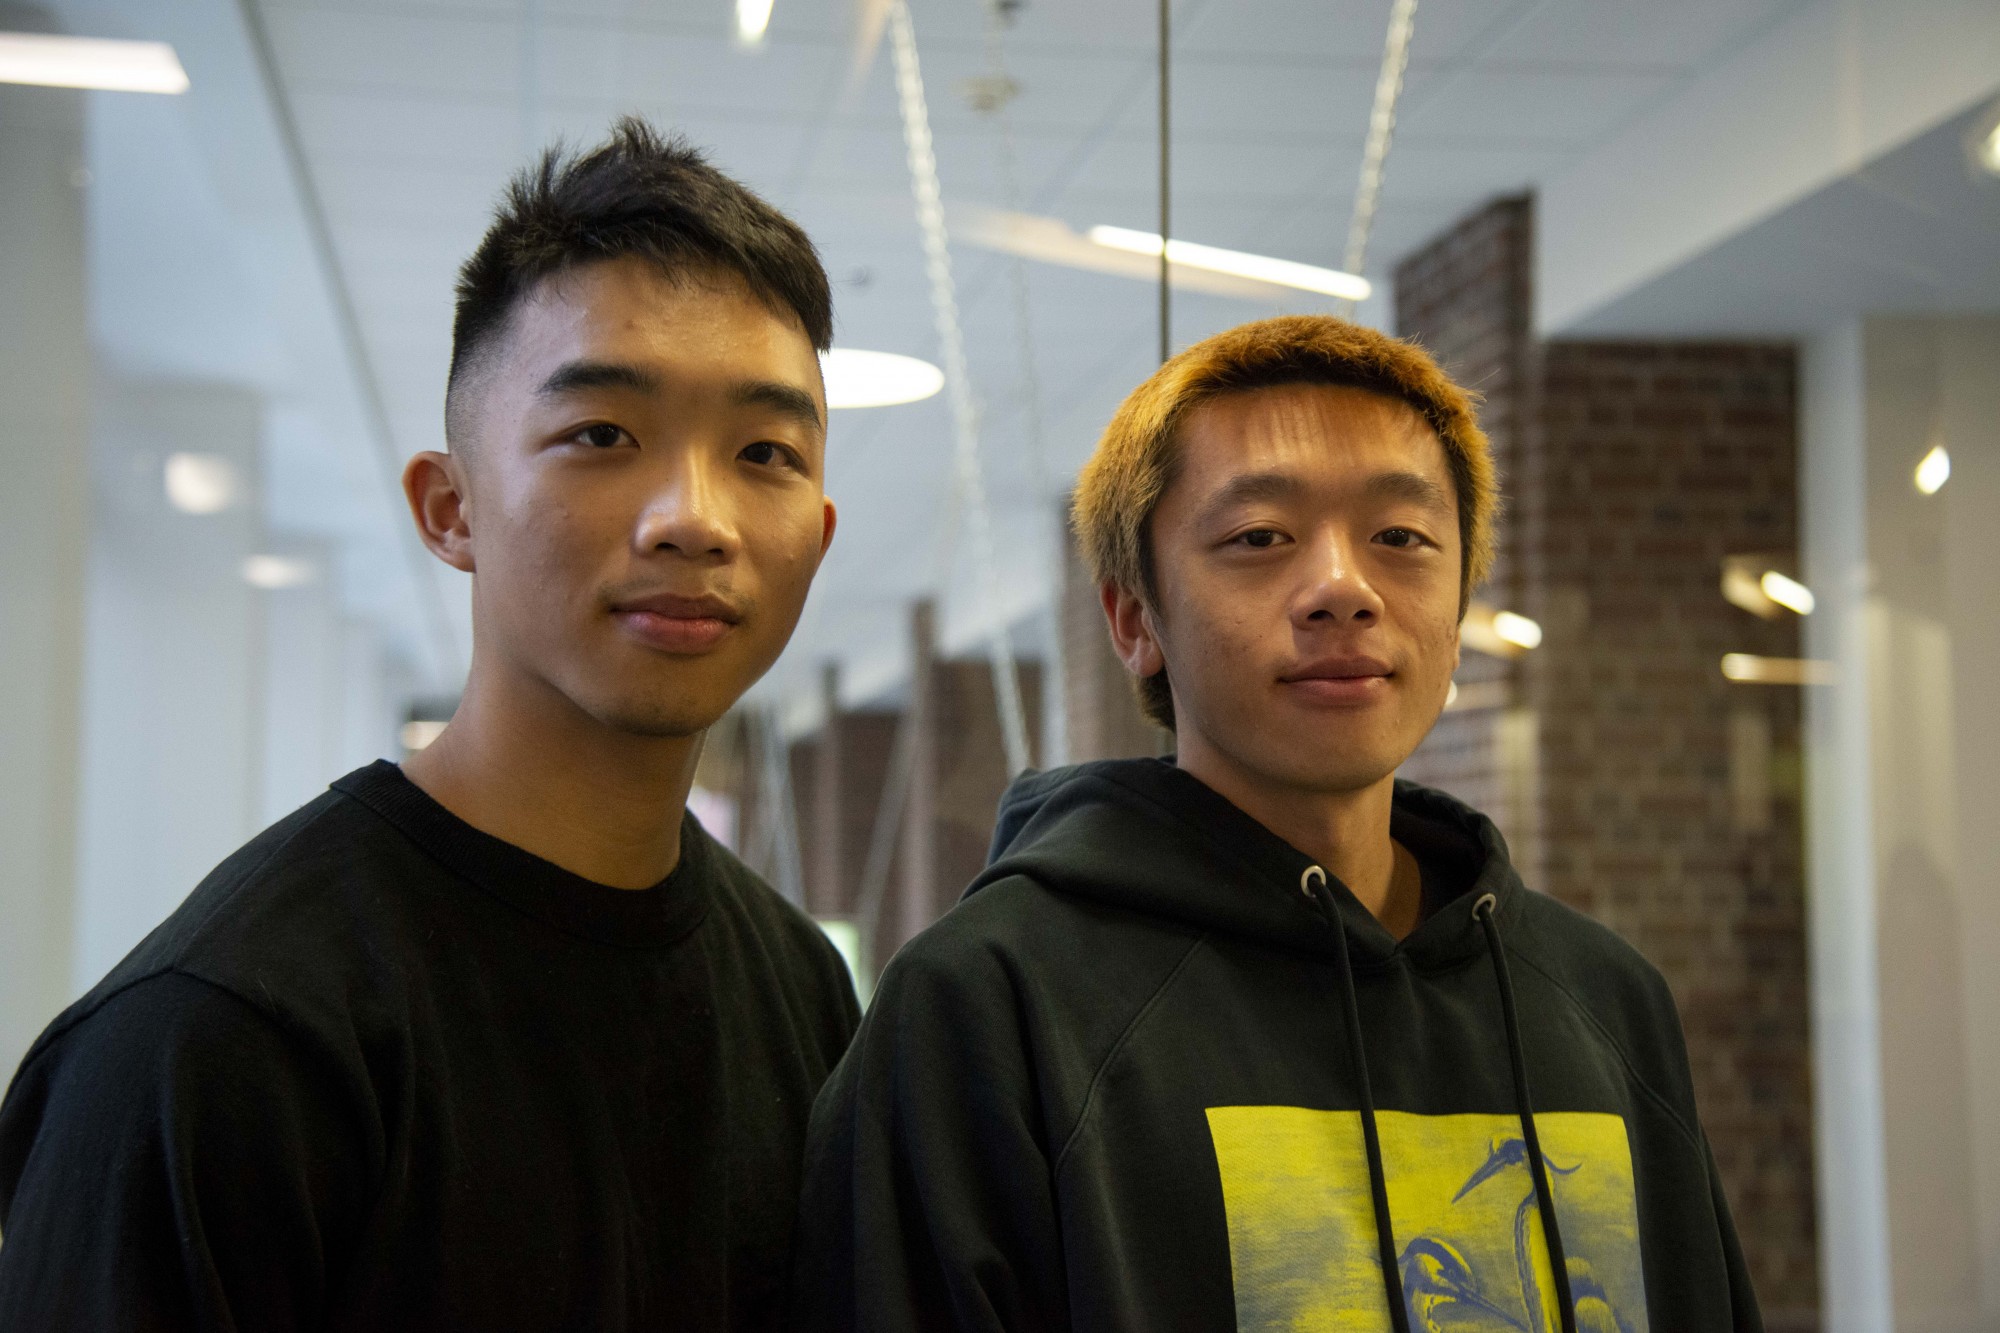 Students Stanley, left, and Dominic, right, pose for a portrait in Coffman Union on Friday, Dec. 6. 